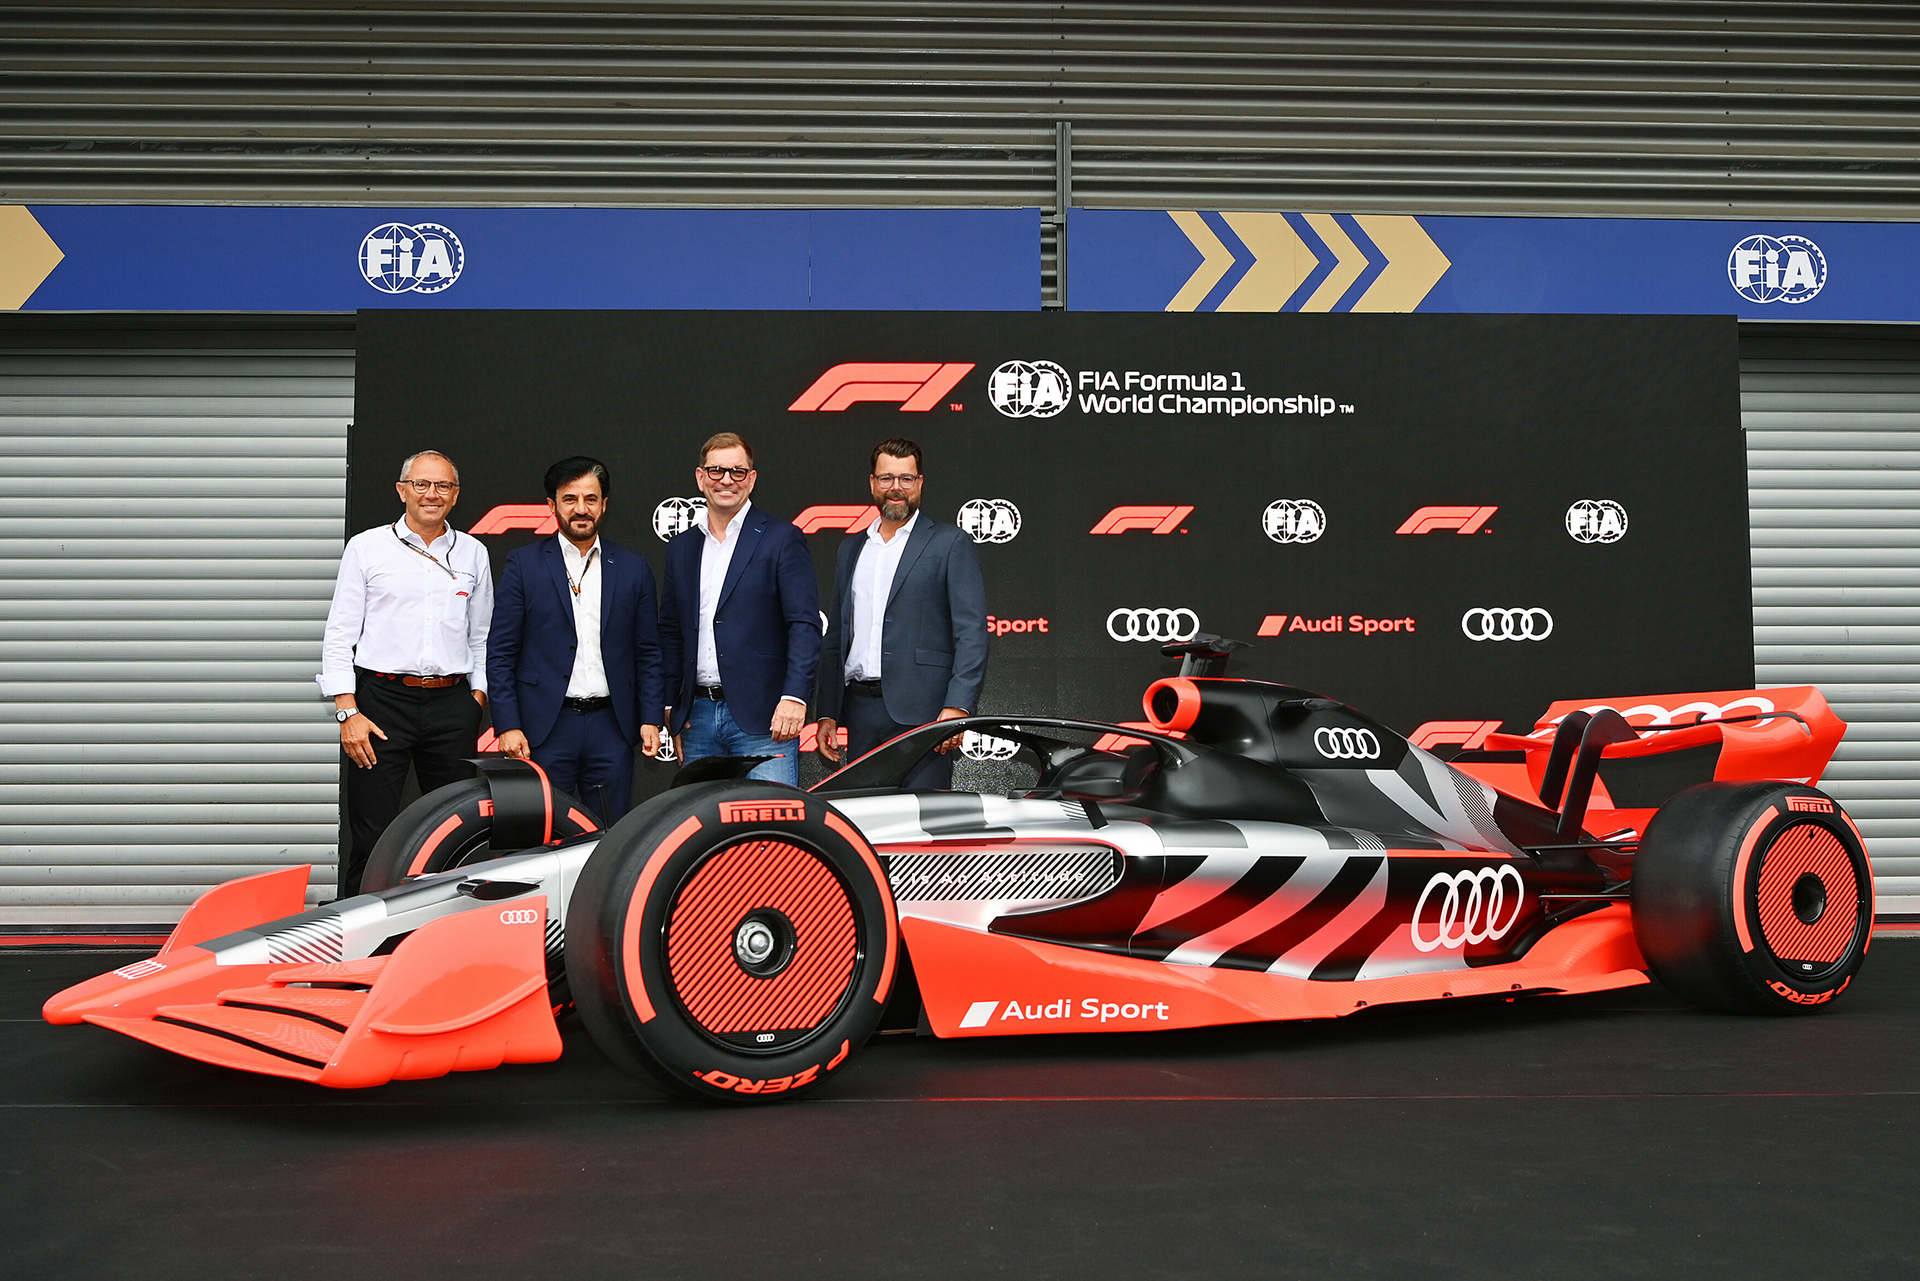 Stefano Domenicali, Formula 1 President and CEO, Mohammed ben Sulayem, President of the International Automobile Federation (FIA), Markus Duesmann, Chairman of the Board of Management of AUDI AG, and Oliver Hoffmann, Member of the Board of Management for Technical Development of AUDI AG